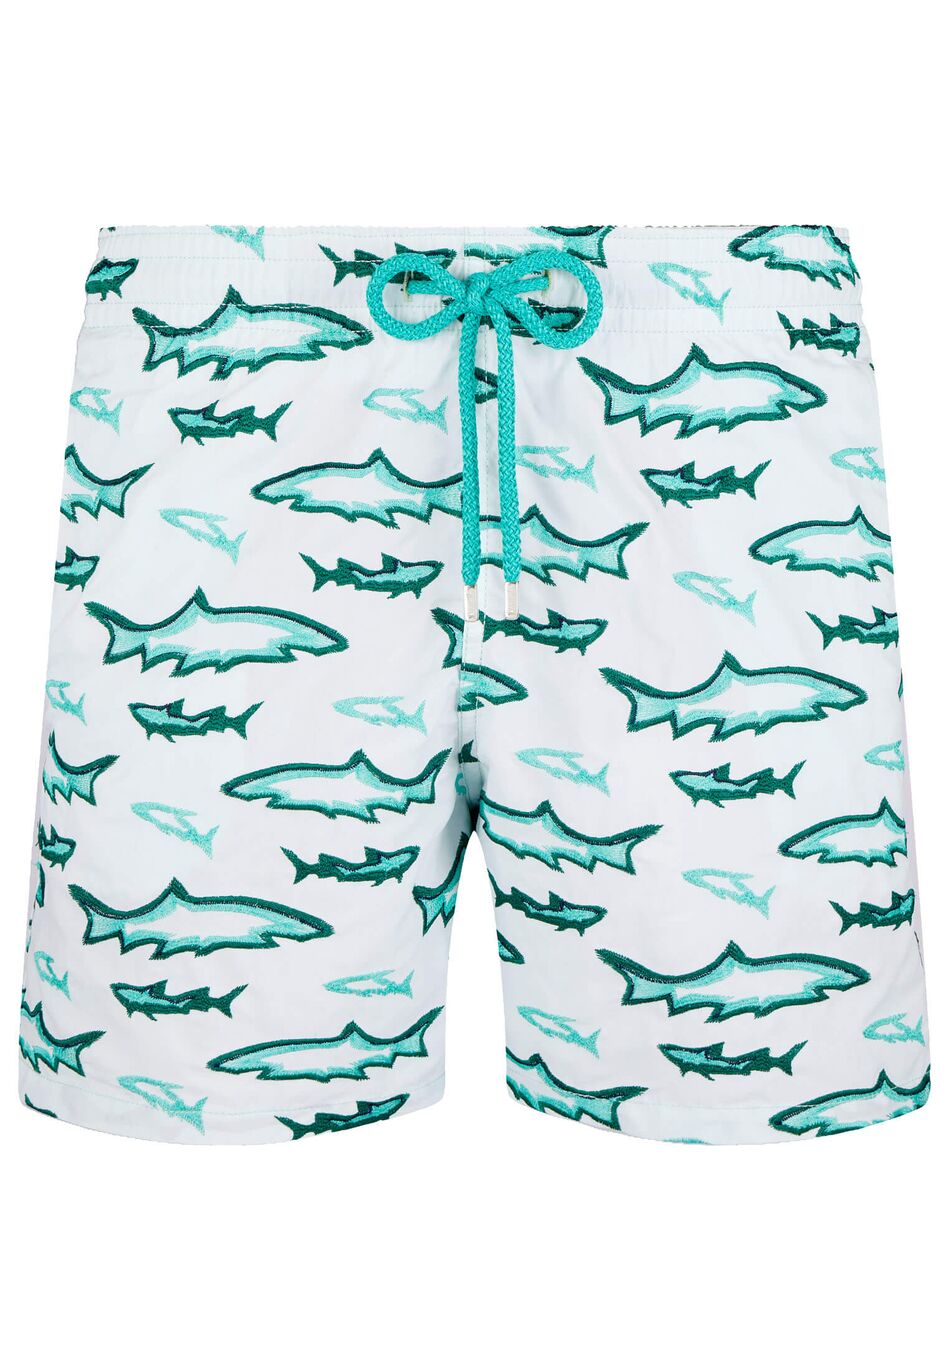 Embroidered Swim Shorts Requins 3D - Limited Edition